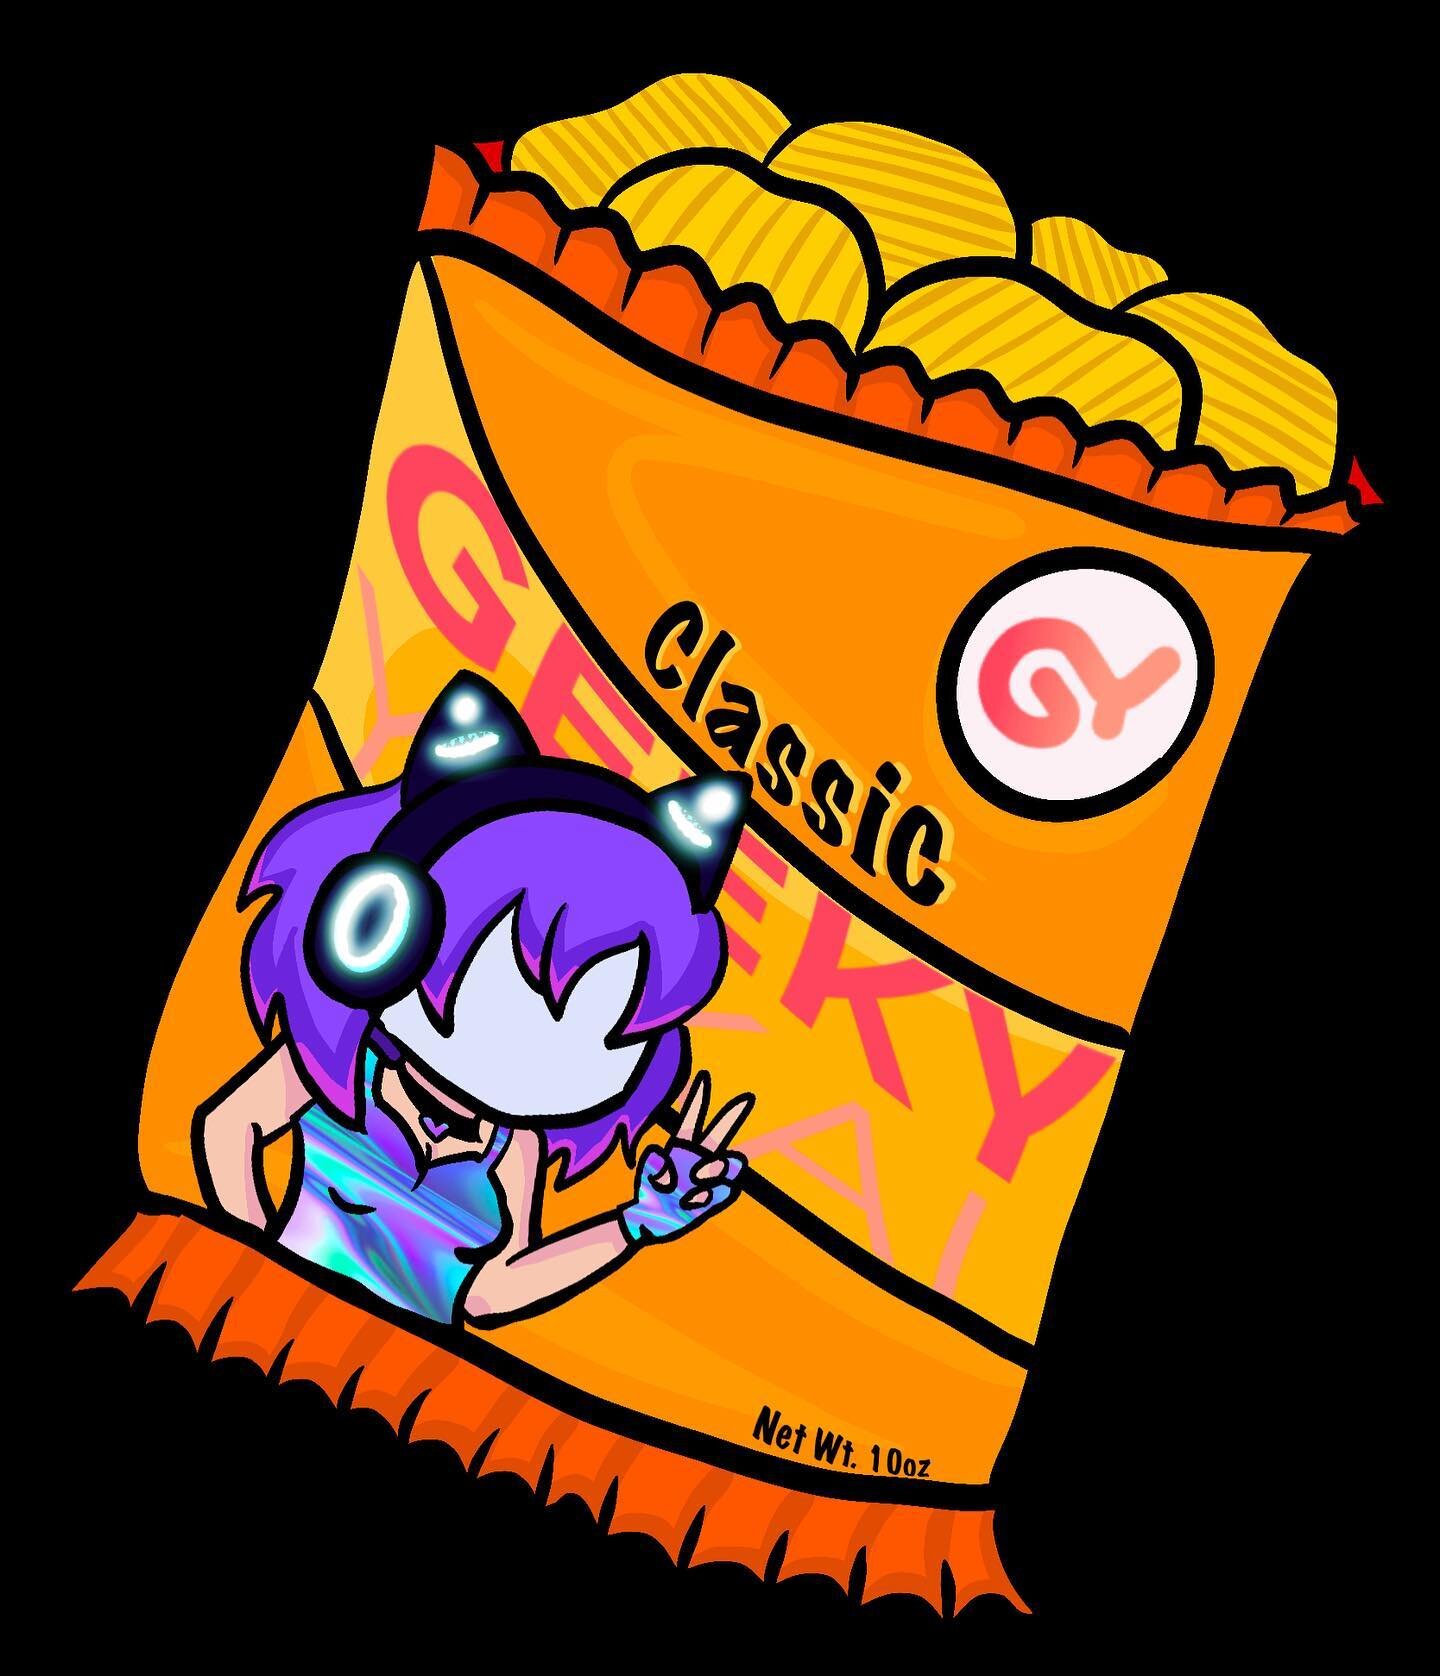 Wondering what&rsquo;s Mira&rsquo;s favorite snack? She&rsquo;s a classic chip eater! Top flavors are sour cream and onion or cheddar ones!